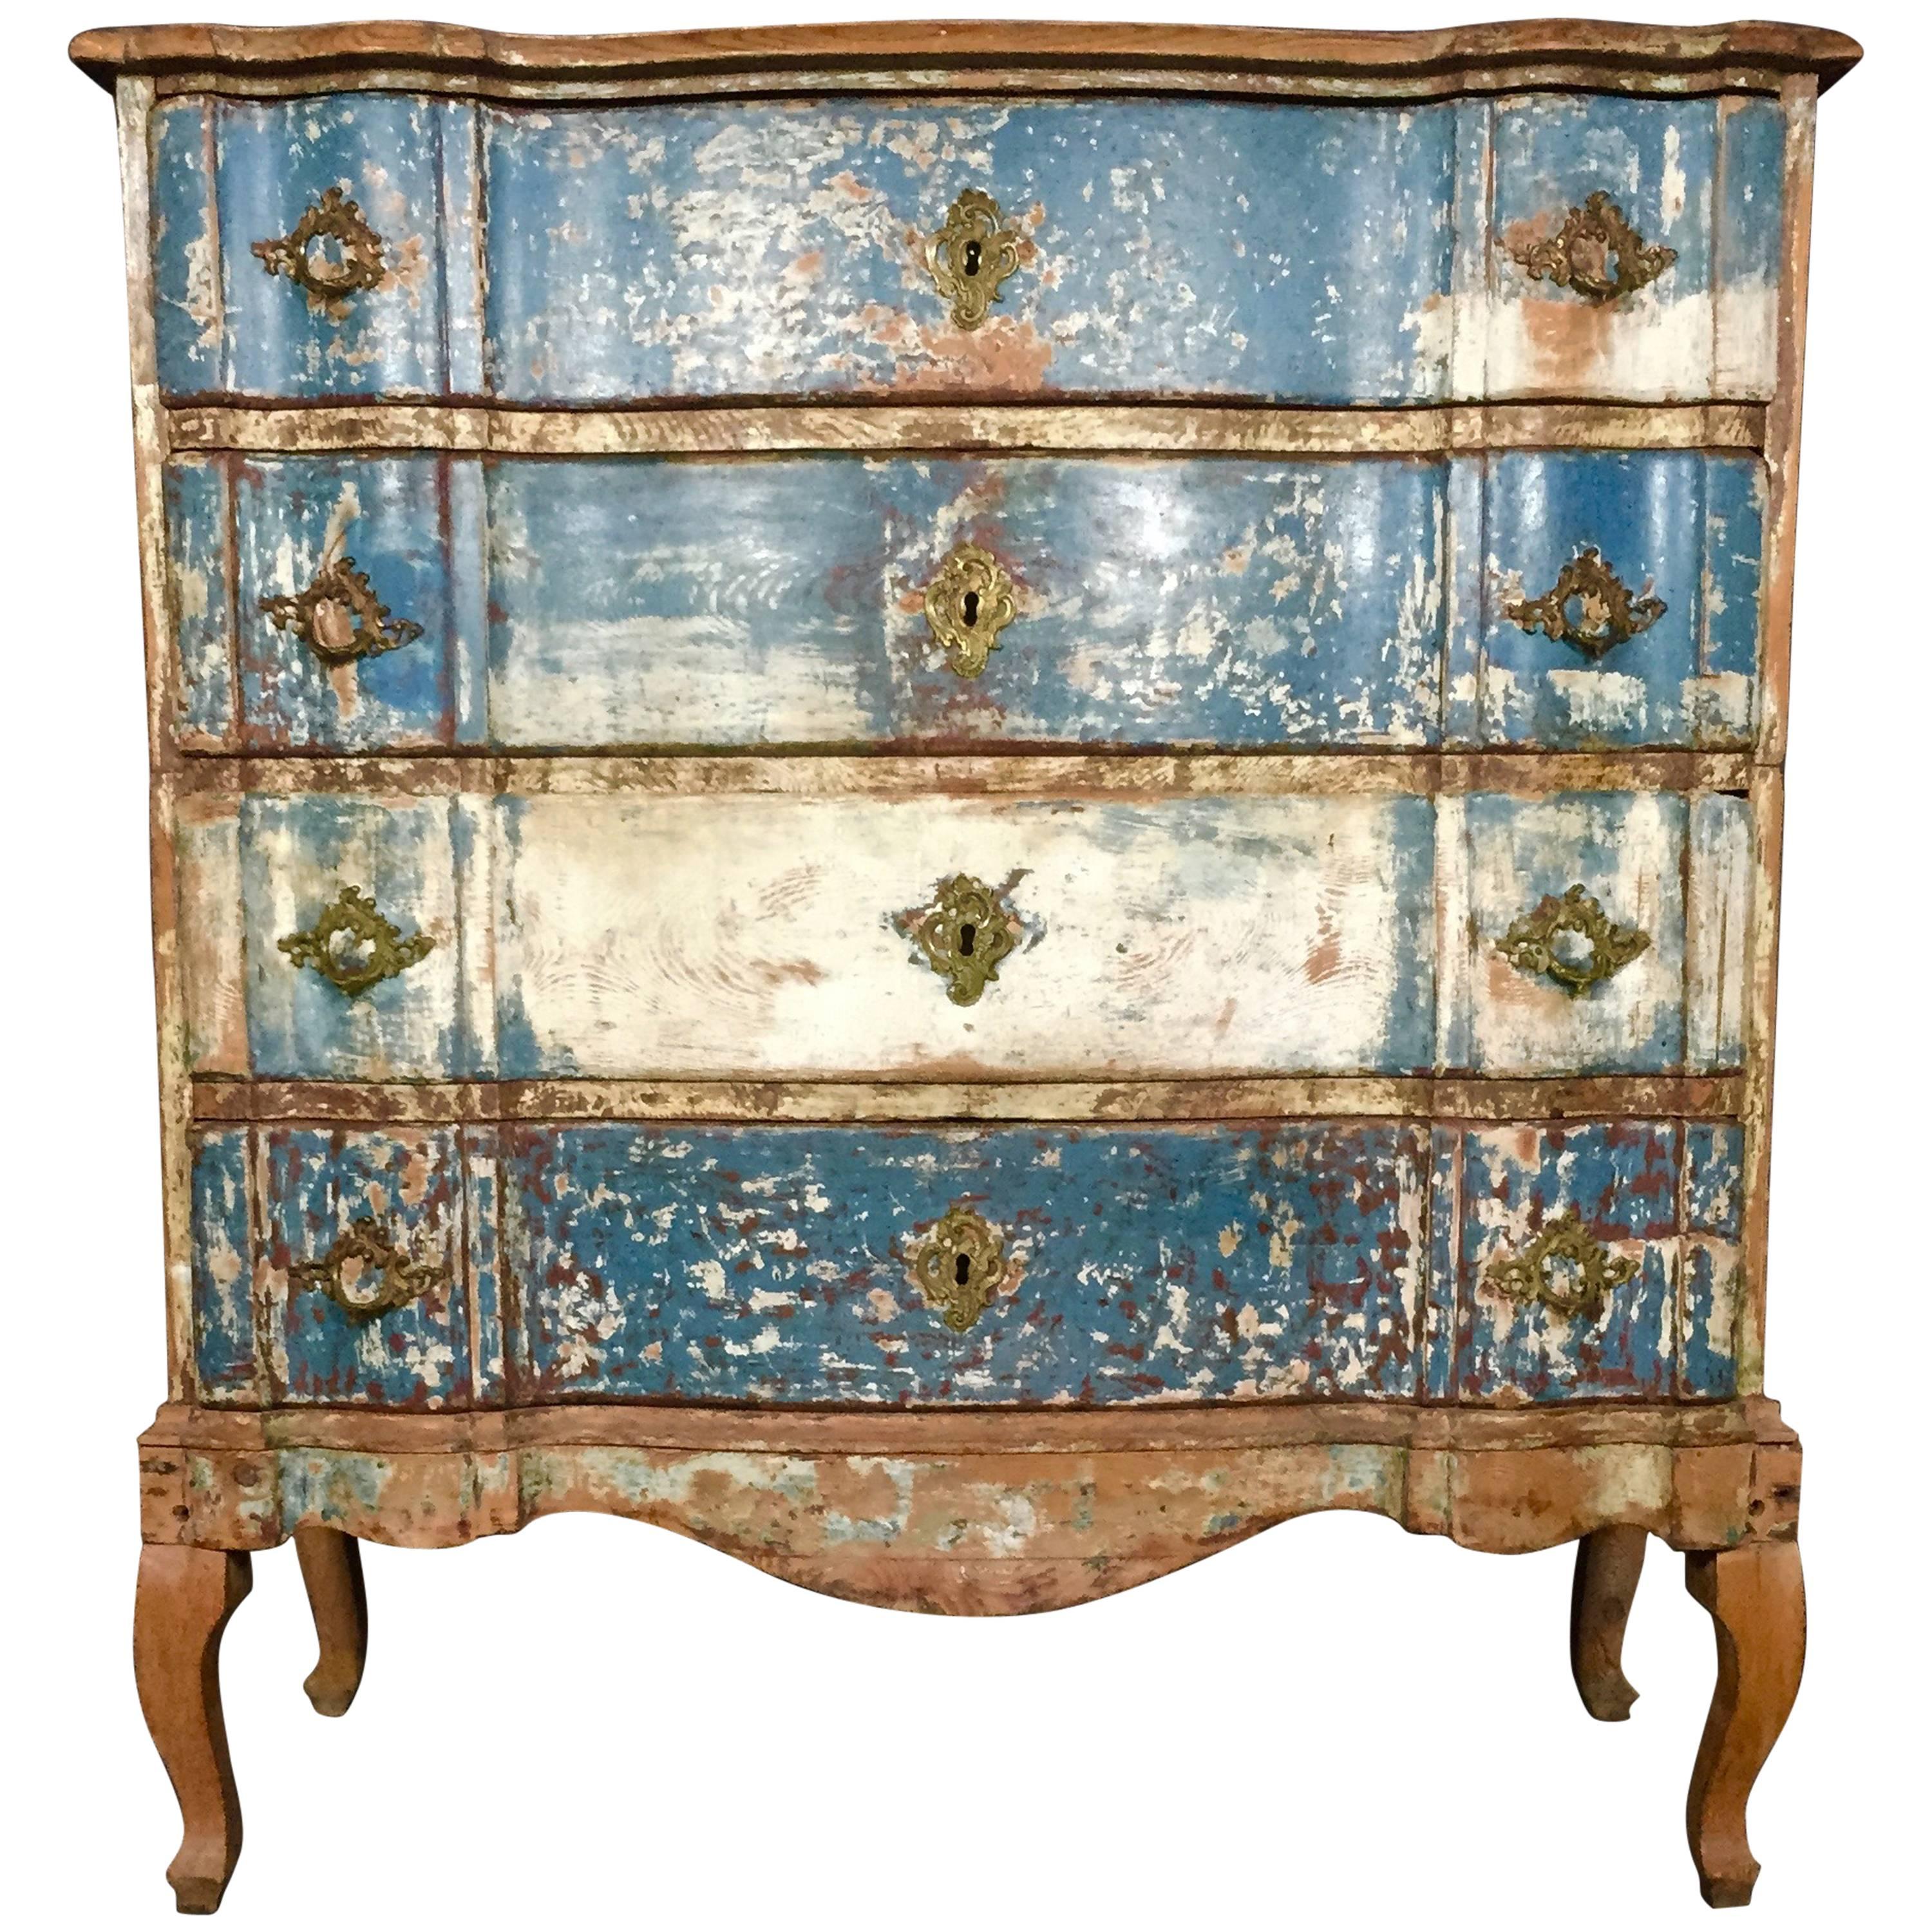 Late 18th Century Painted Baroque Chest of Drawers, Denmark